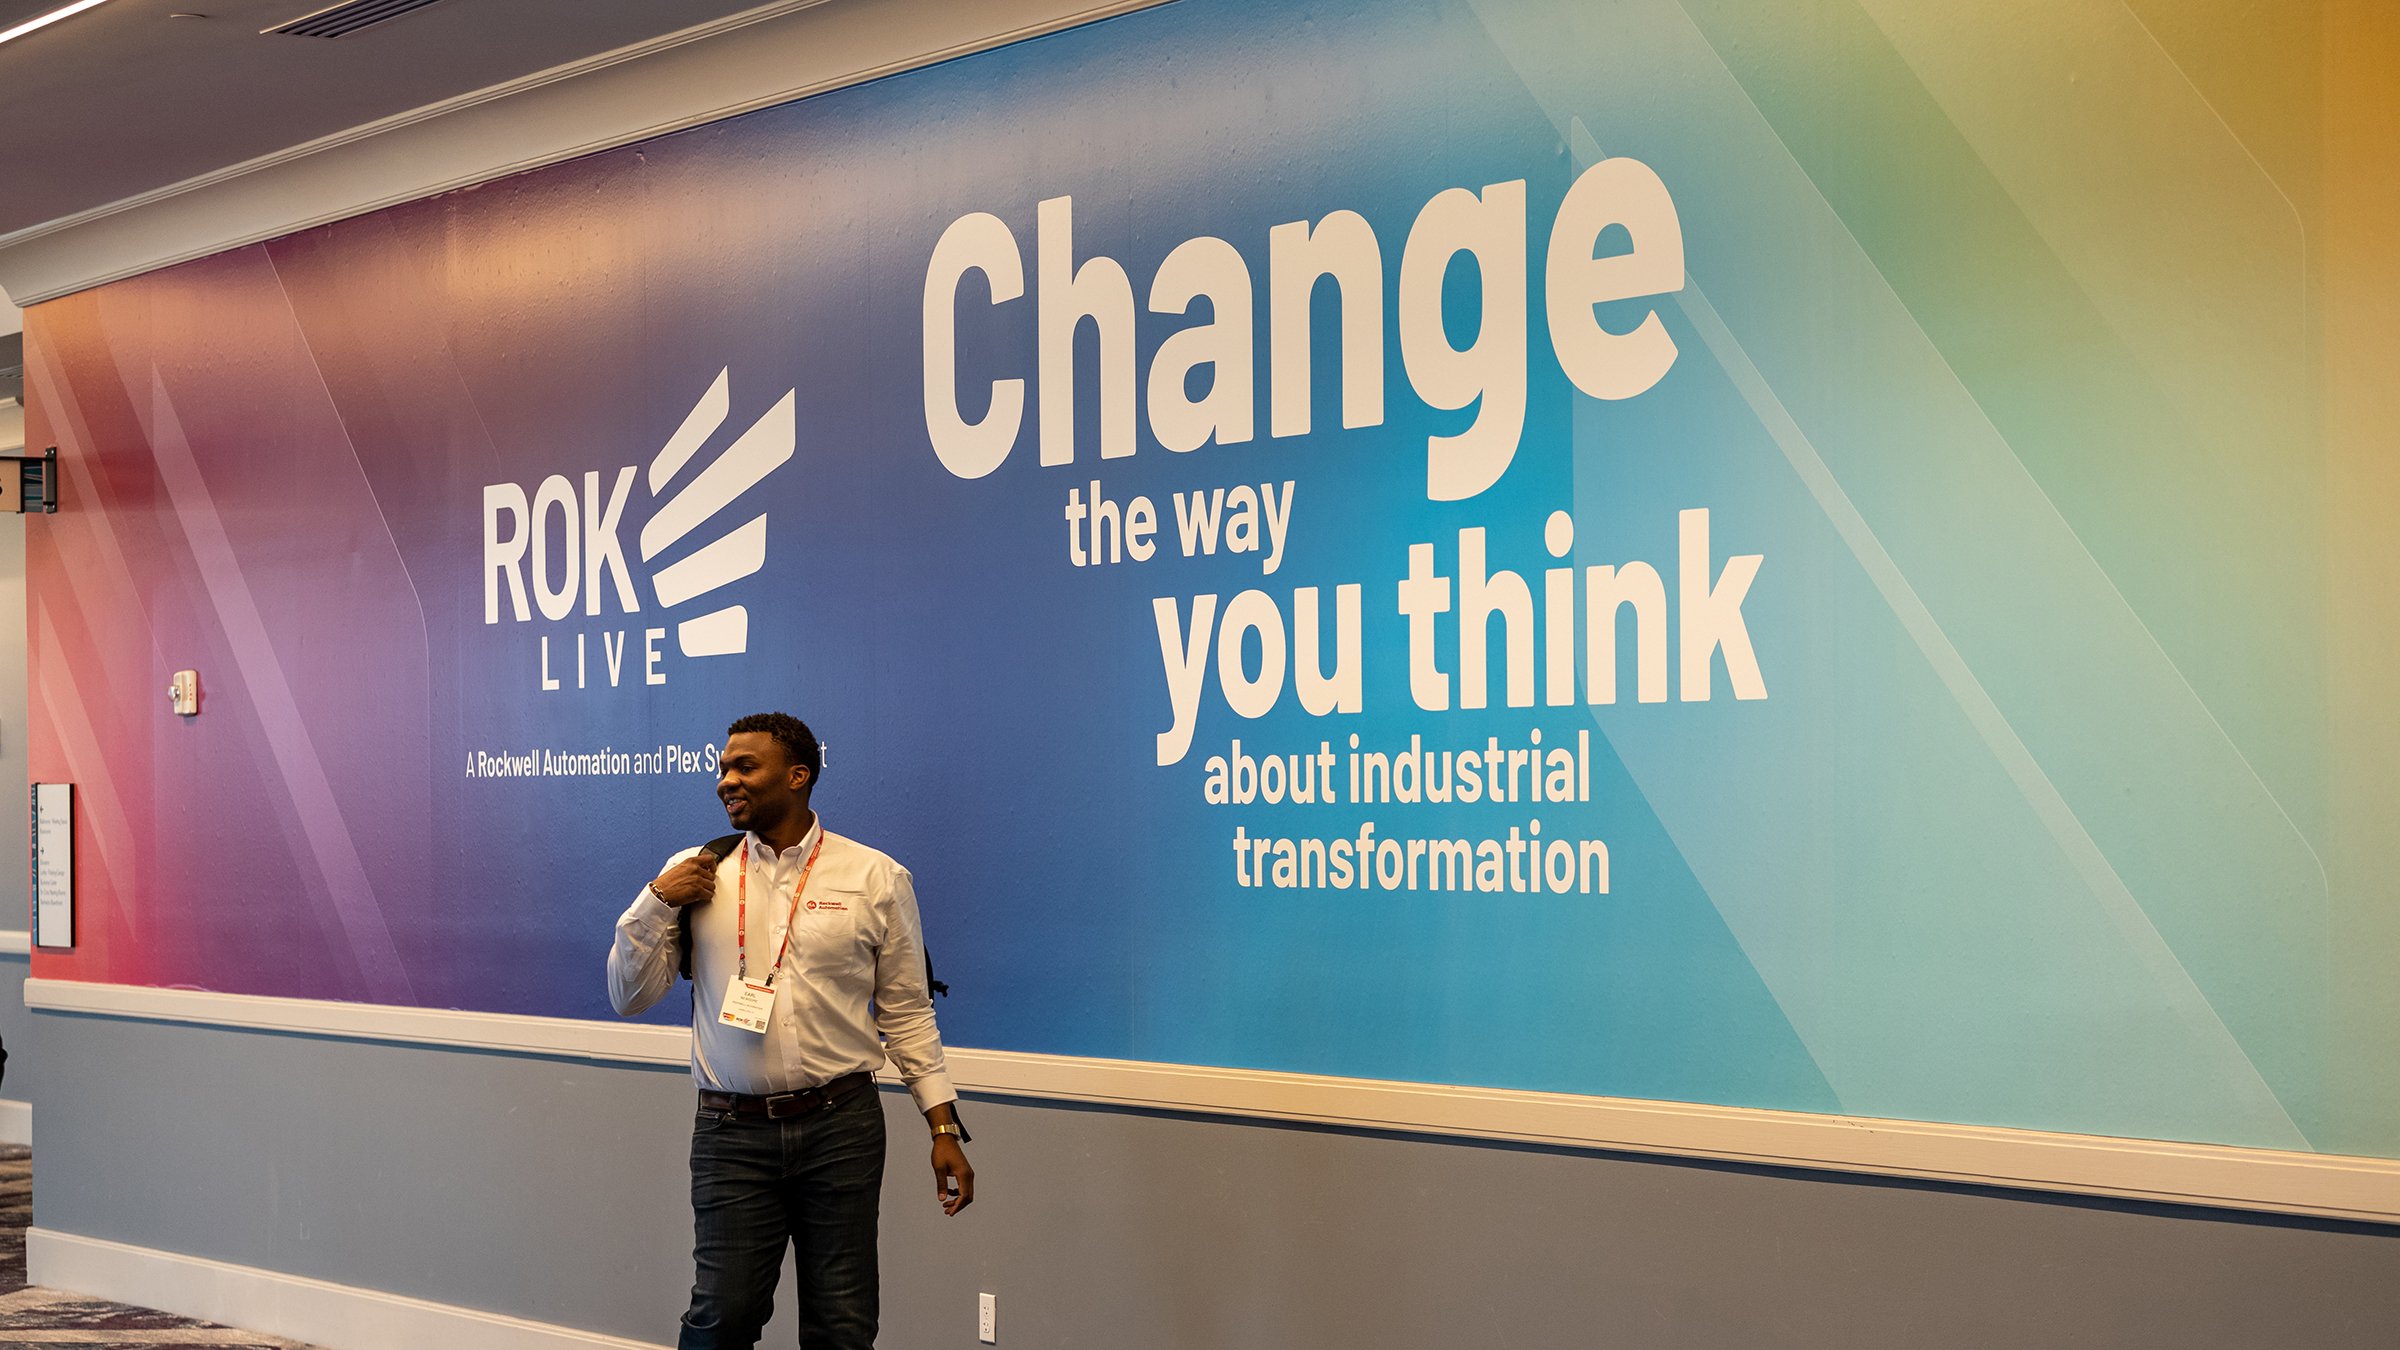 ROKLive attendee in front of Change the Way you think signage at show